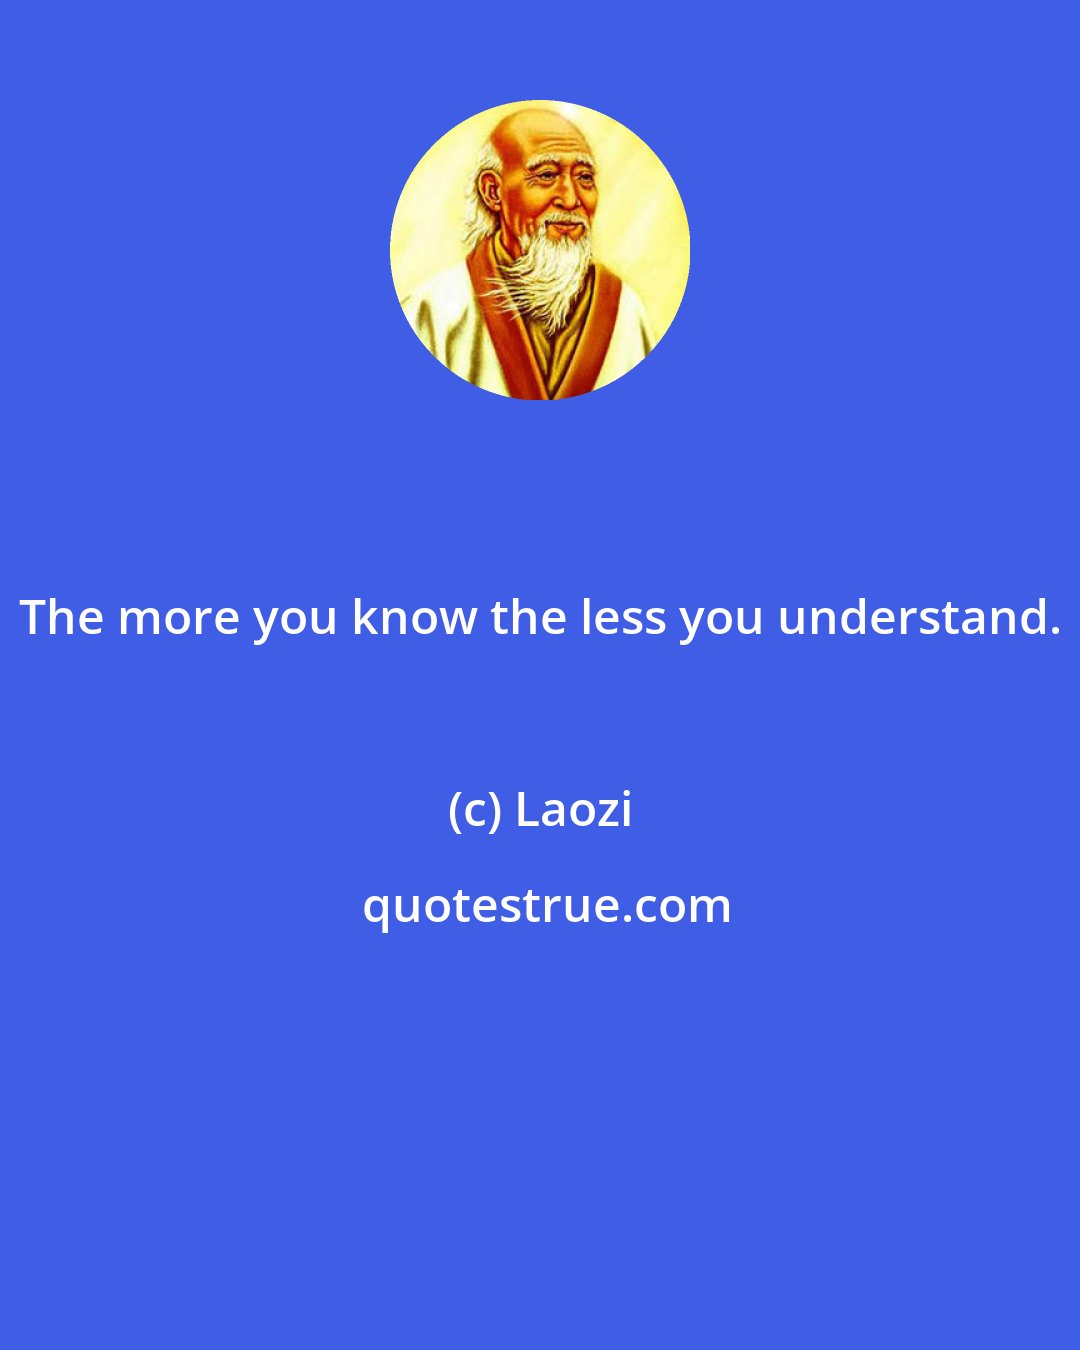 Laozi: The more you know the less you understand.